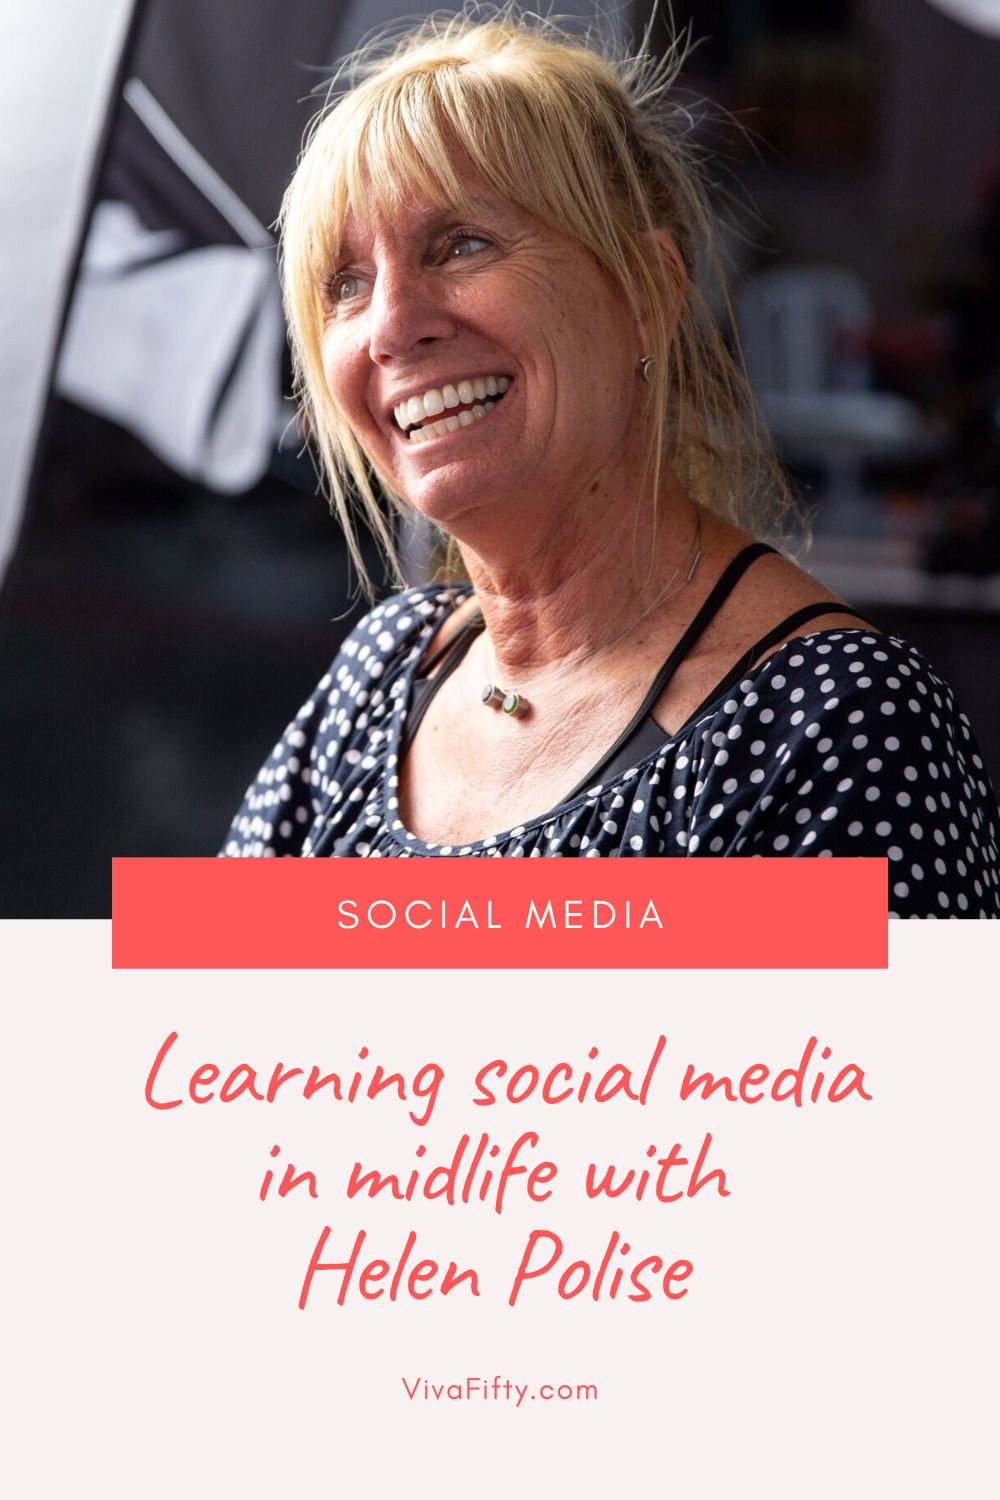 We need more midlife digital content creators to represent women over a certain age. Helen Polise is the social media teacher that can help us get there. 